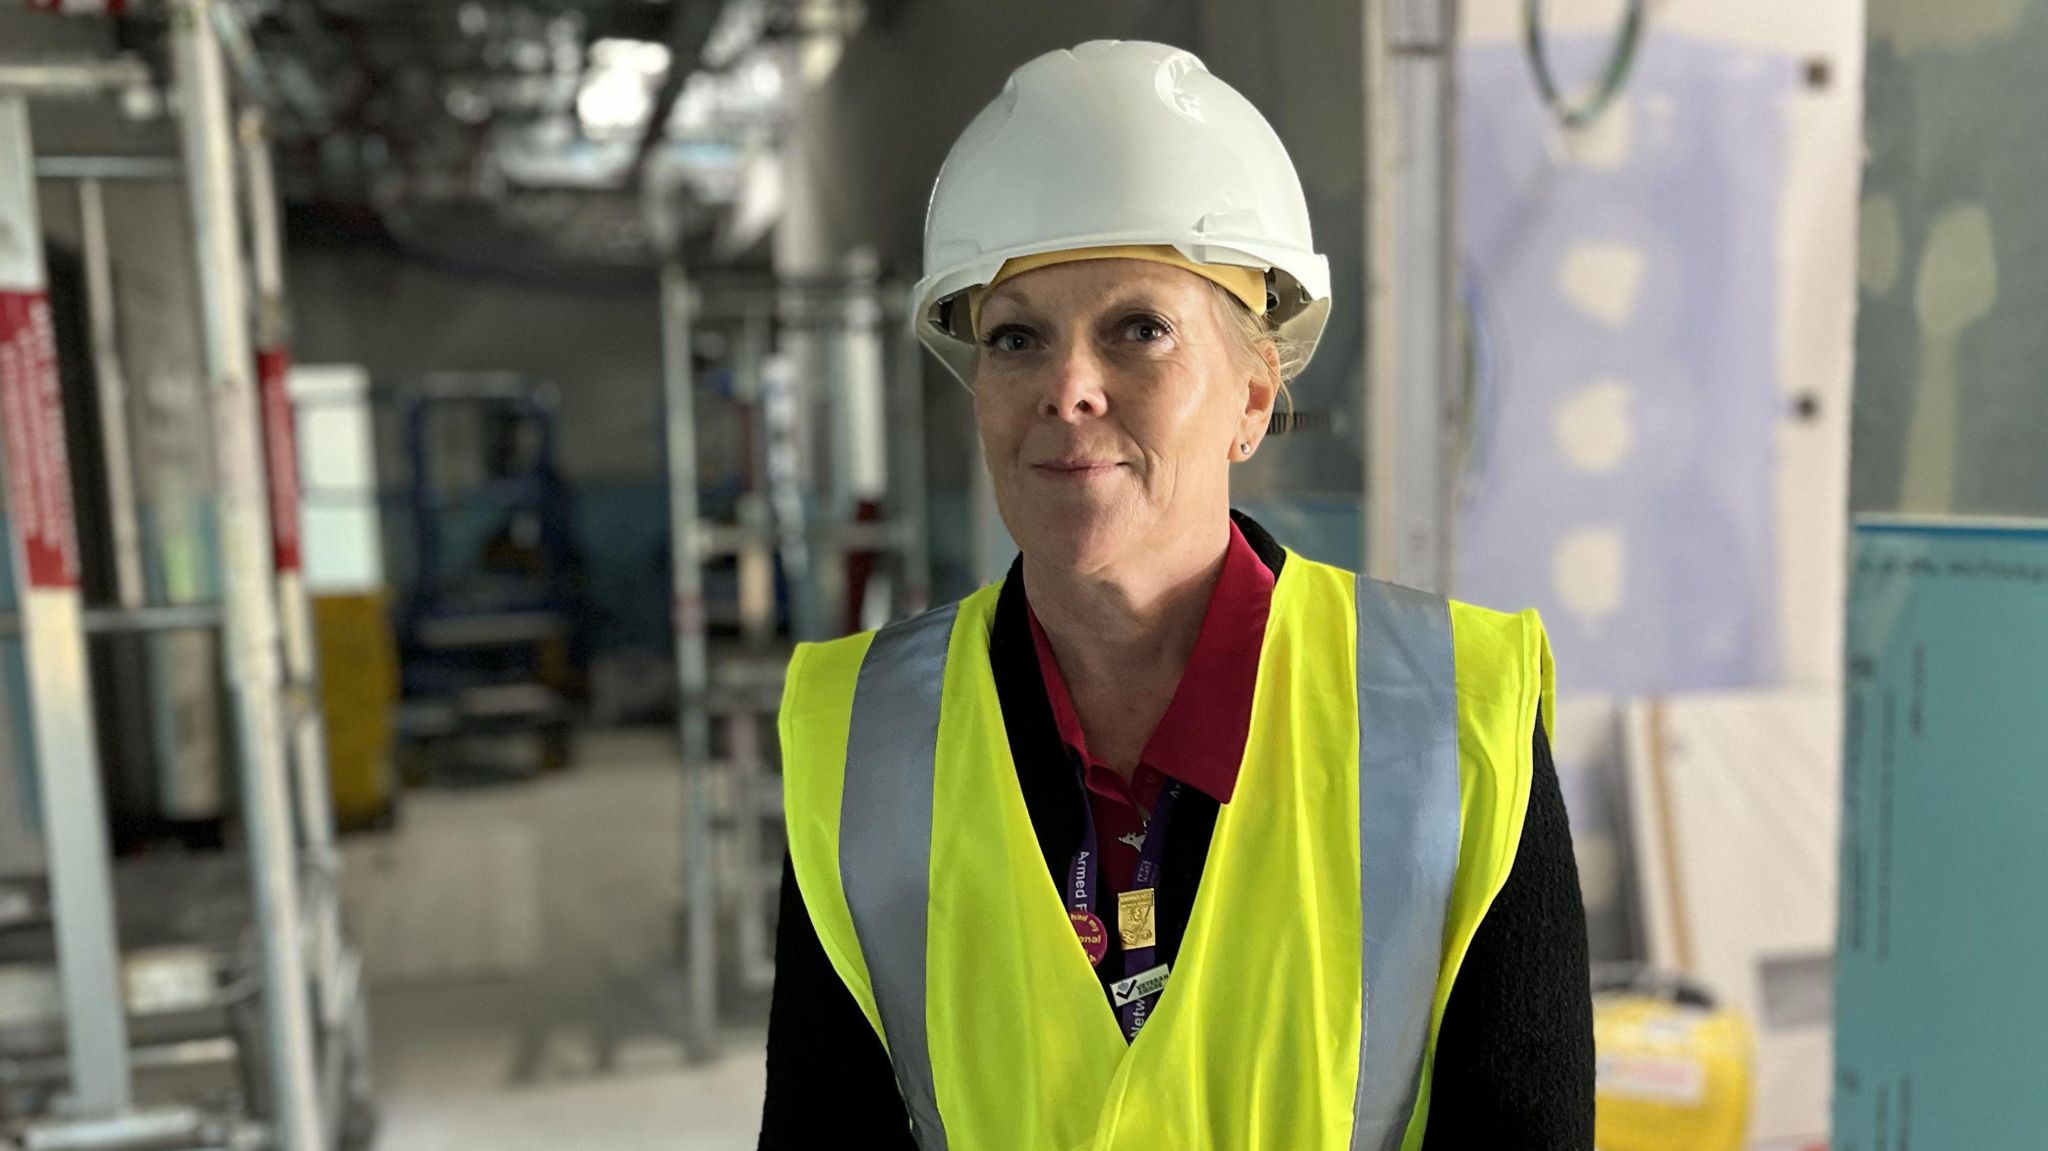 Jane Dickinson inside the new ward wearing a hard hat and high visibility vest